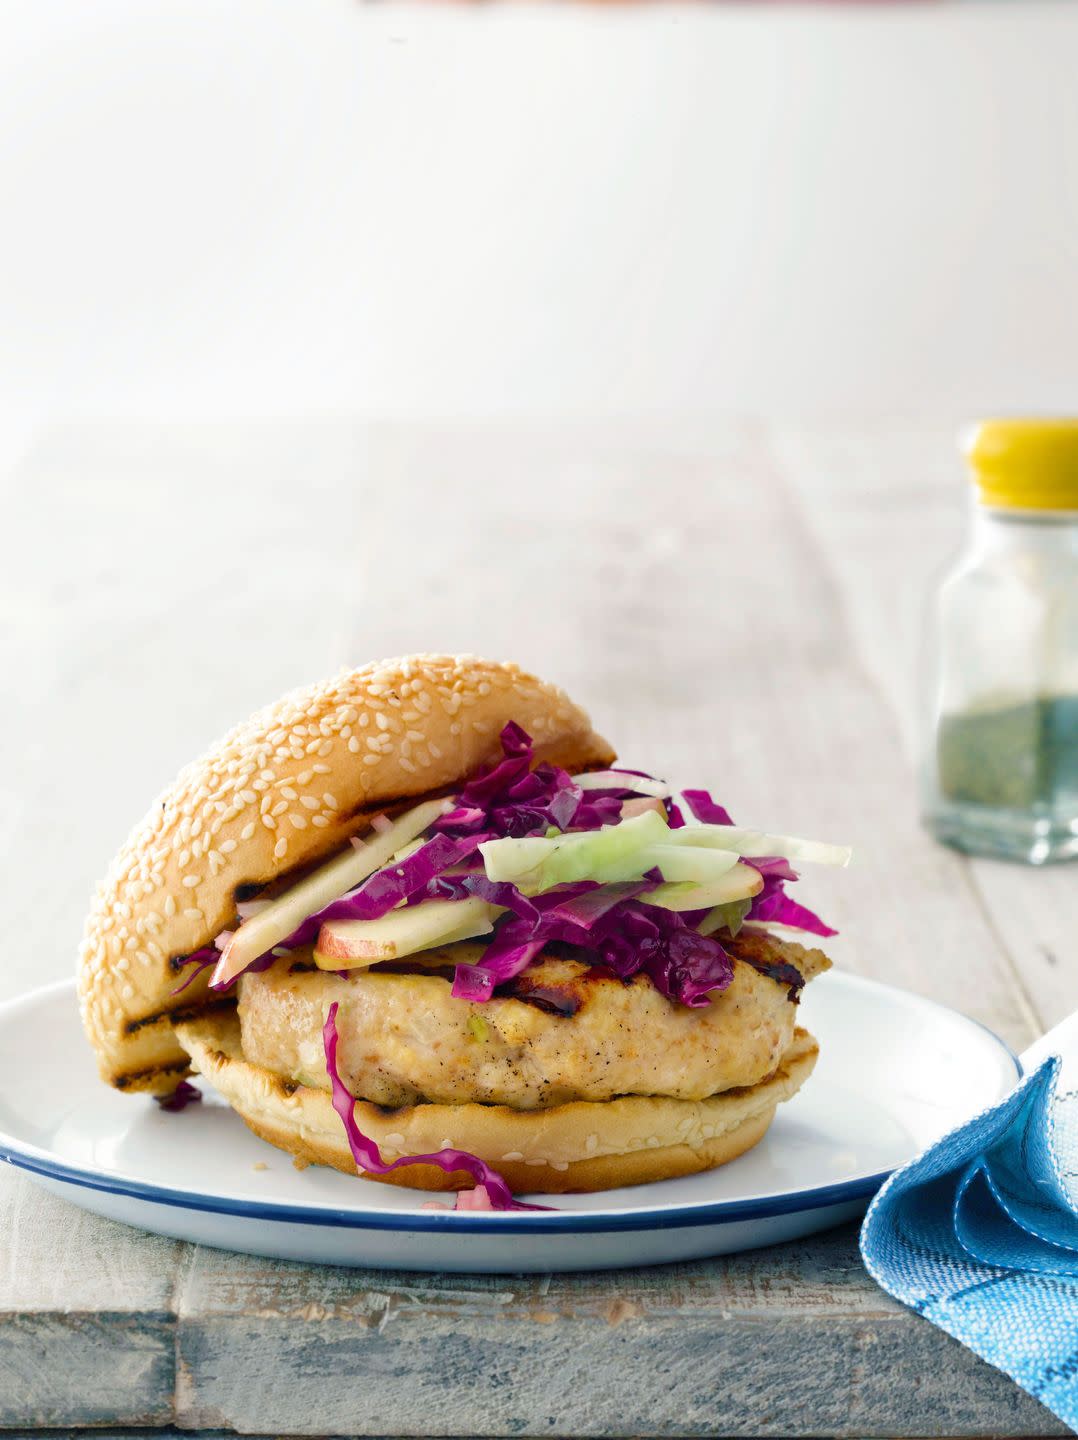 miso glazed chicken burgers with cabbage apple slaw on a white plate with navy trim